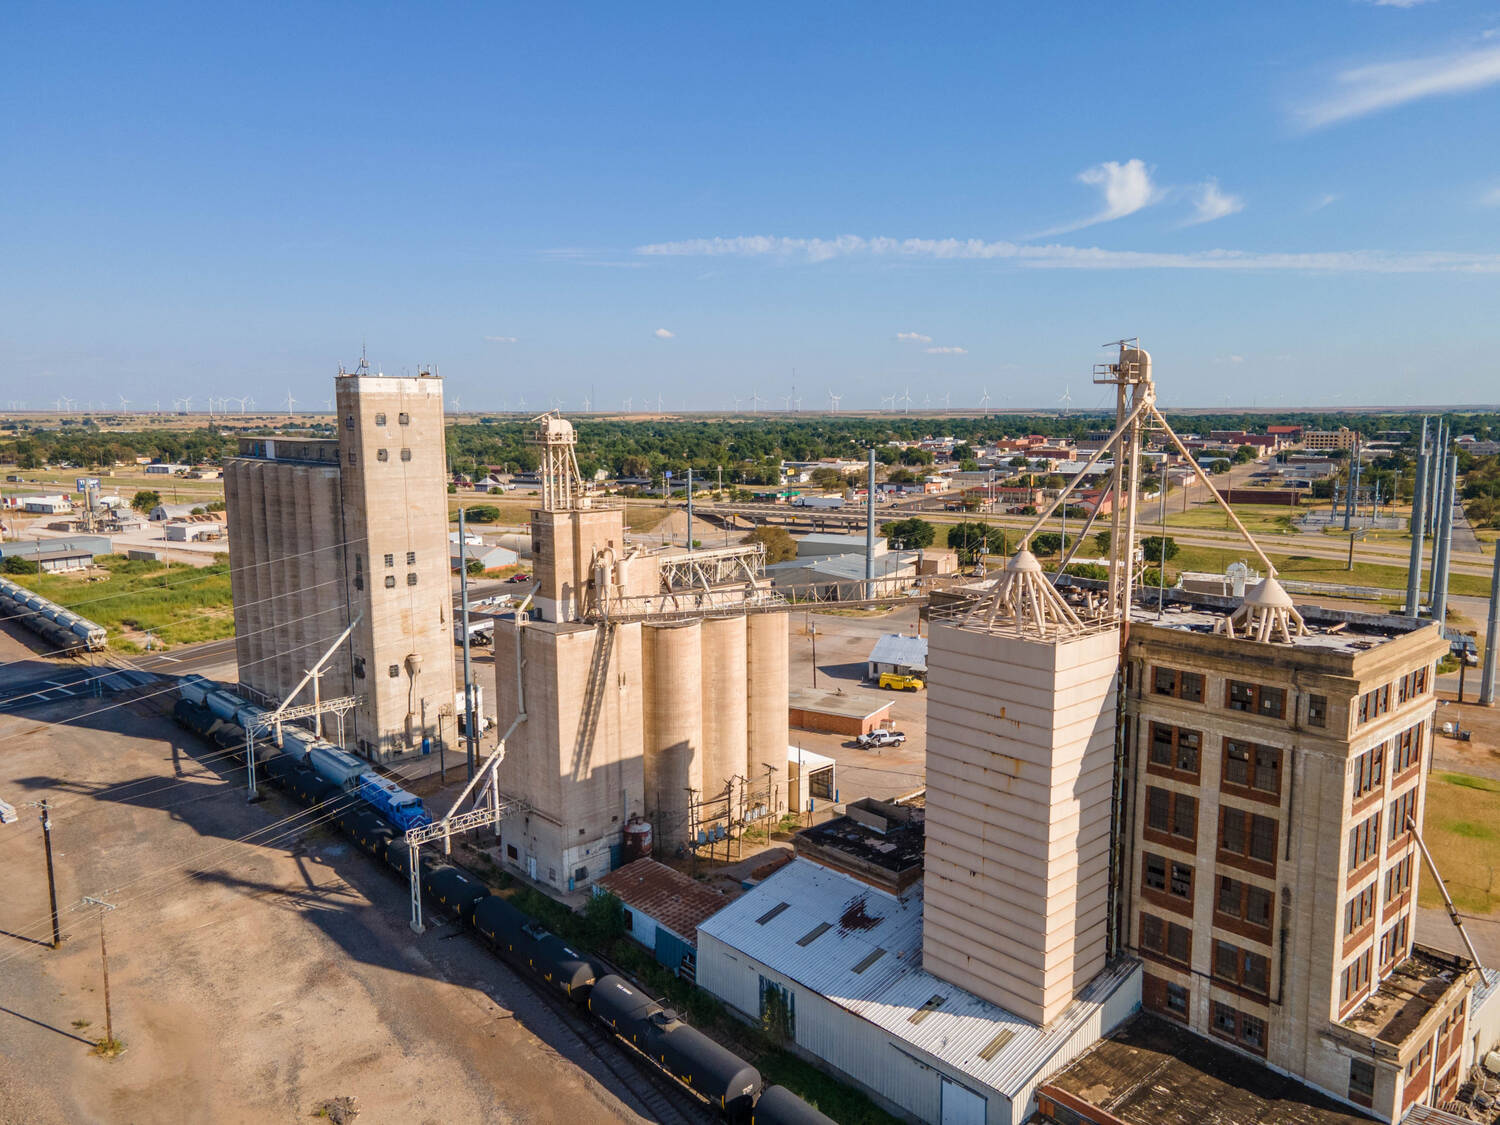 Boltons-Crown-Quality-Feed-Grain-Elevator-Vernon-TX-Wilbarger-County-Republic-Ranches-Bryan-Pickens-17-of-25